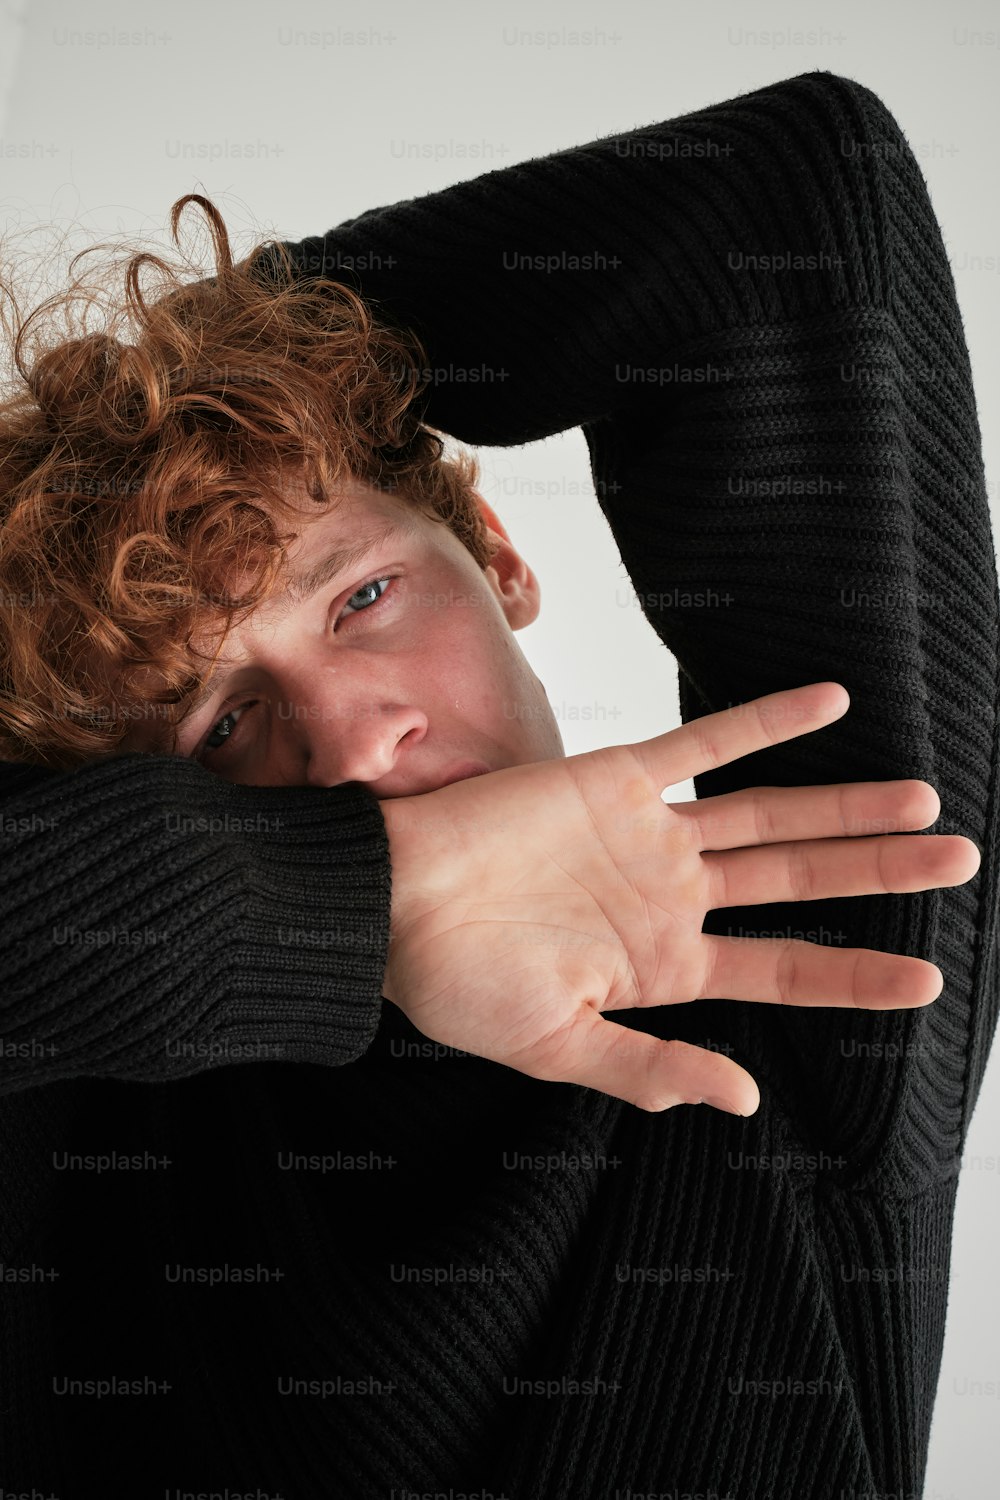 a man with curly hair covering his face with his hands